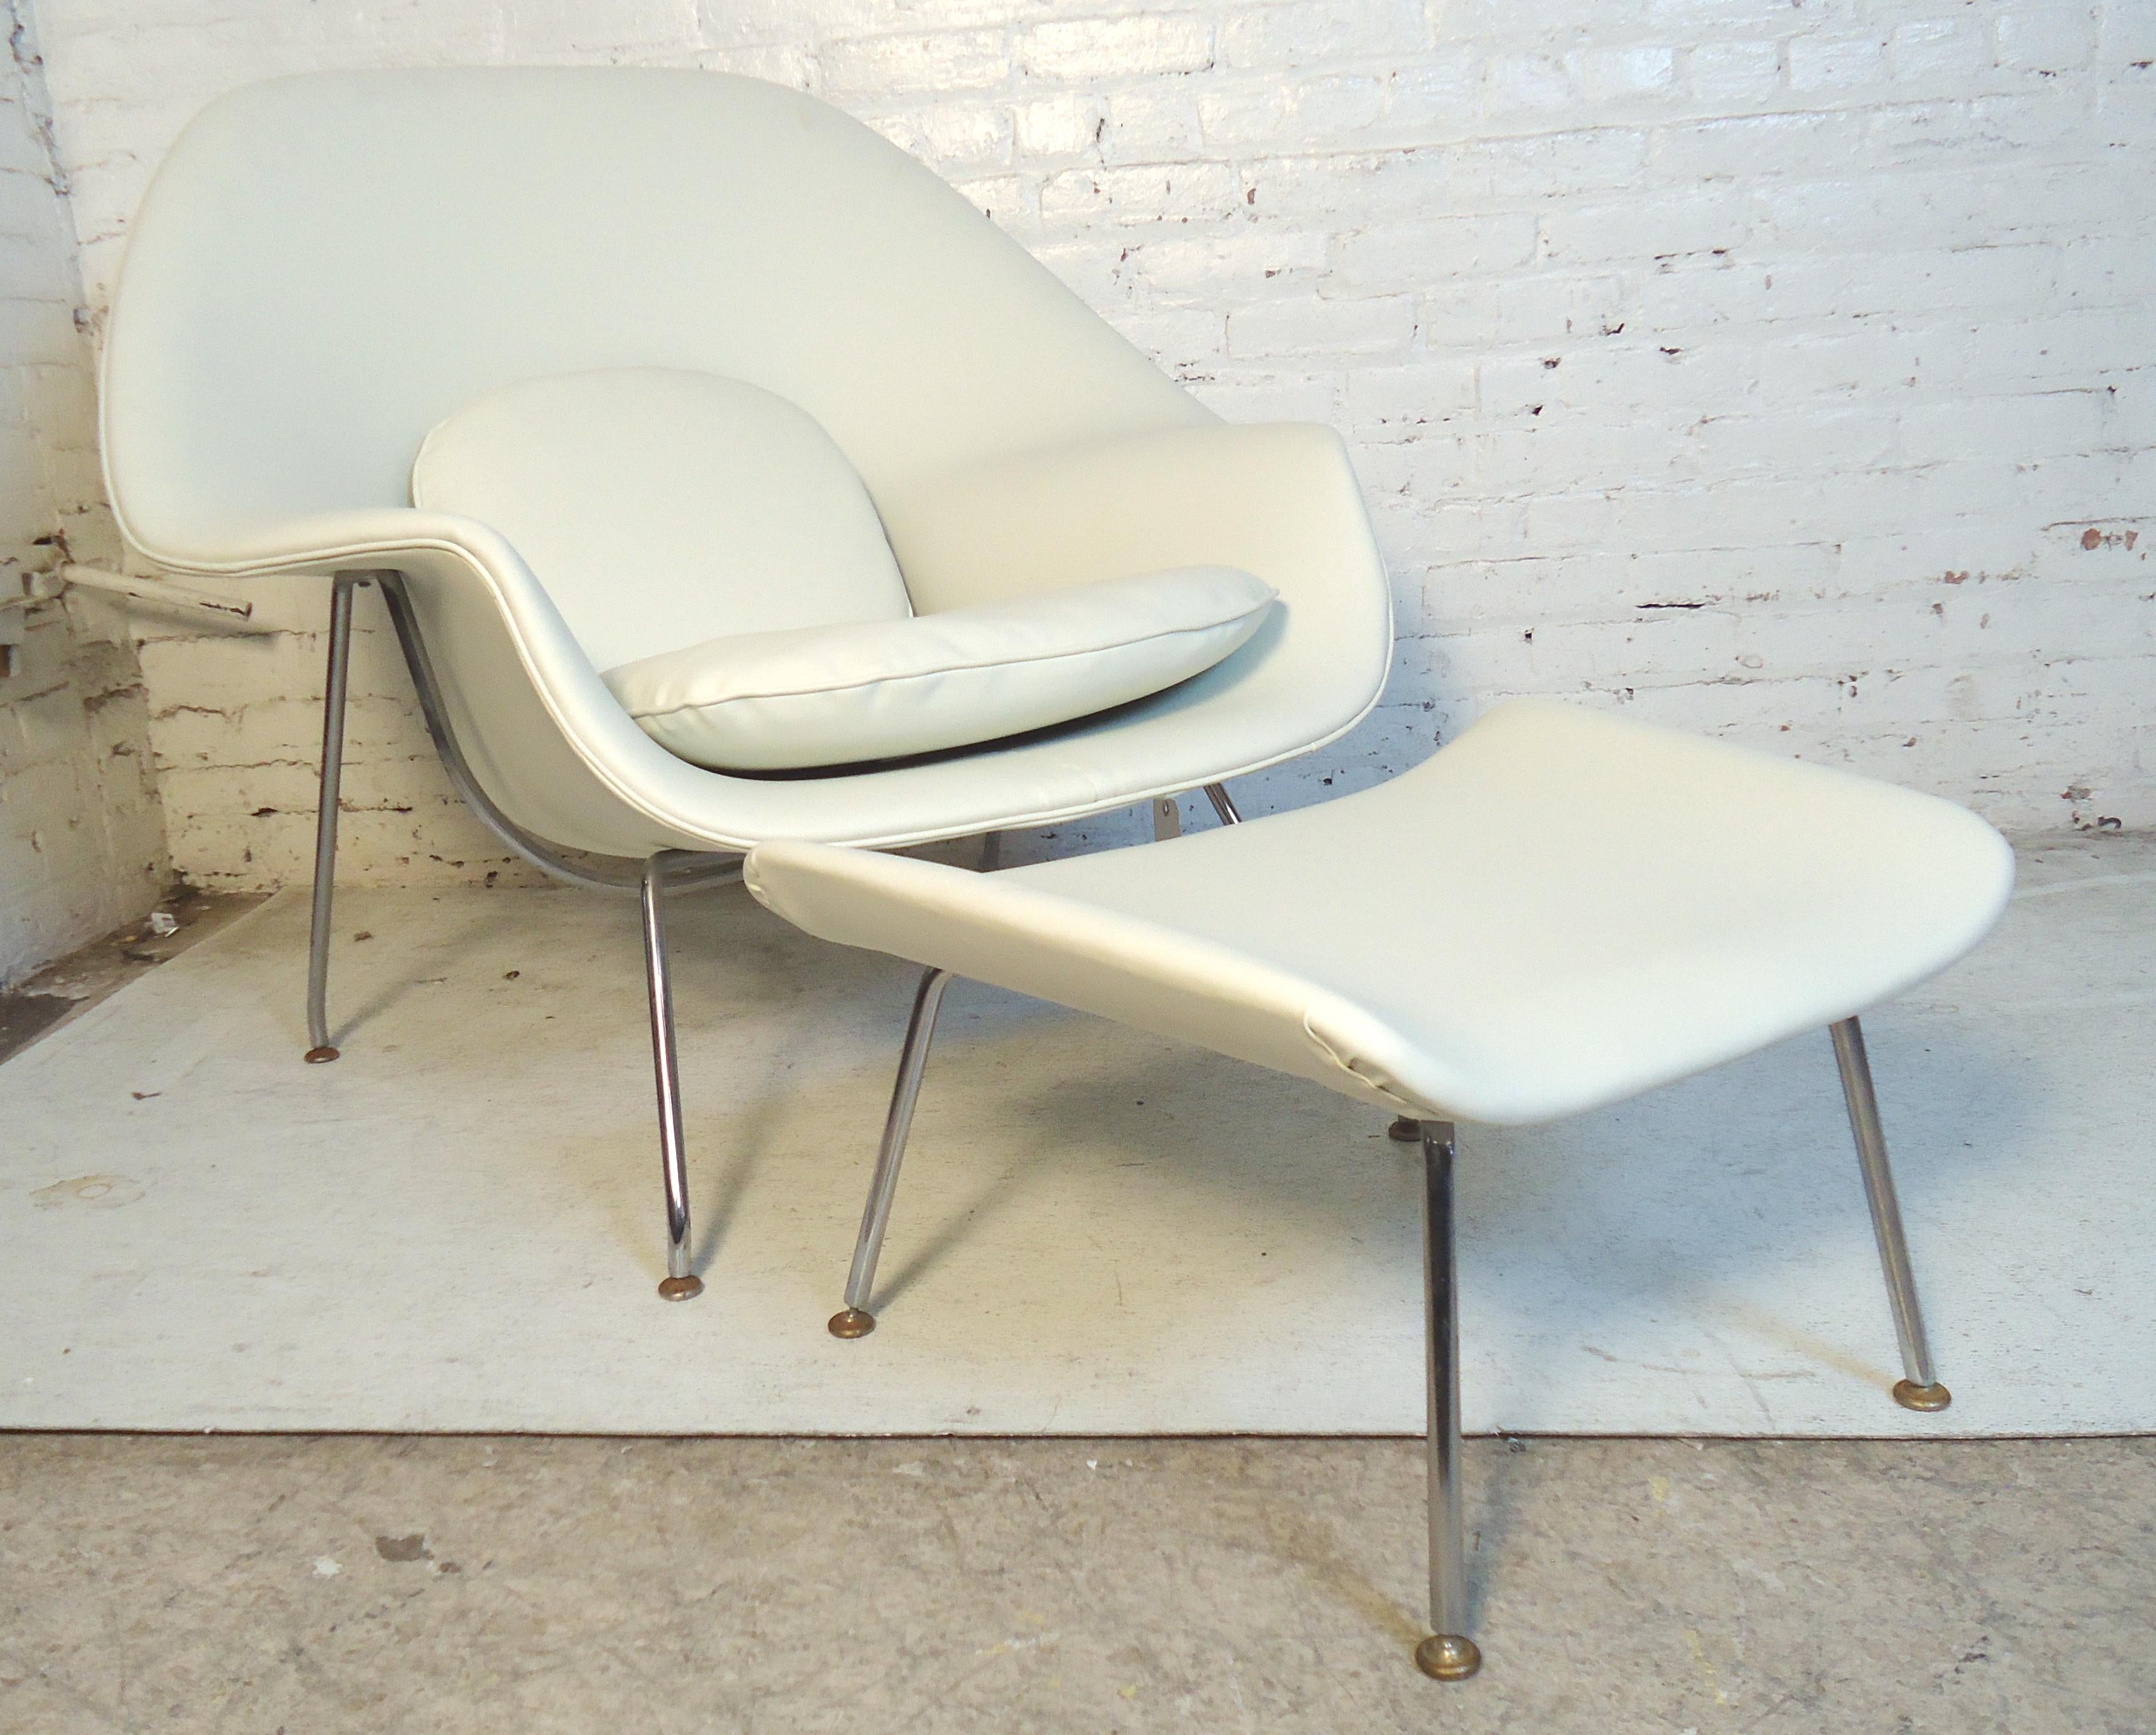 Mid-Century Modern Classic chair designed by Eero Saarinen for Knoll. Includes matching ottoman. Great form and design newly recovered in naugahyde.

(Please confirm item location - NY or NJ - with dealer).
  